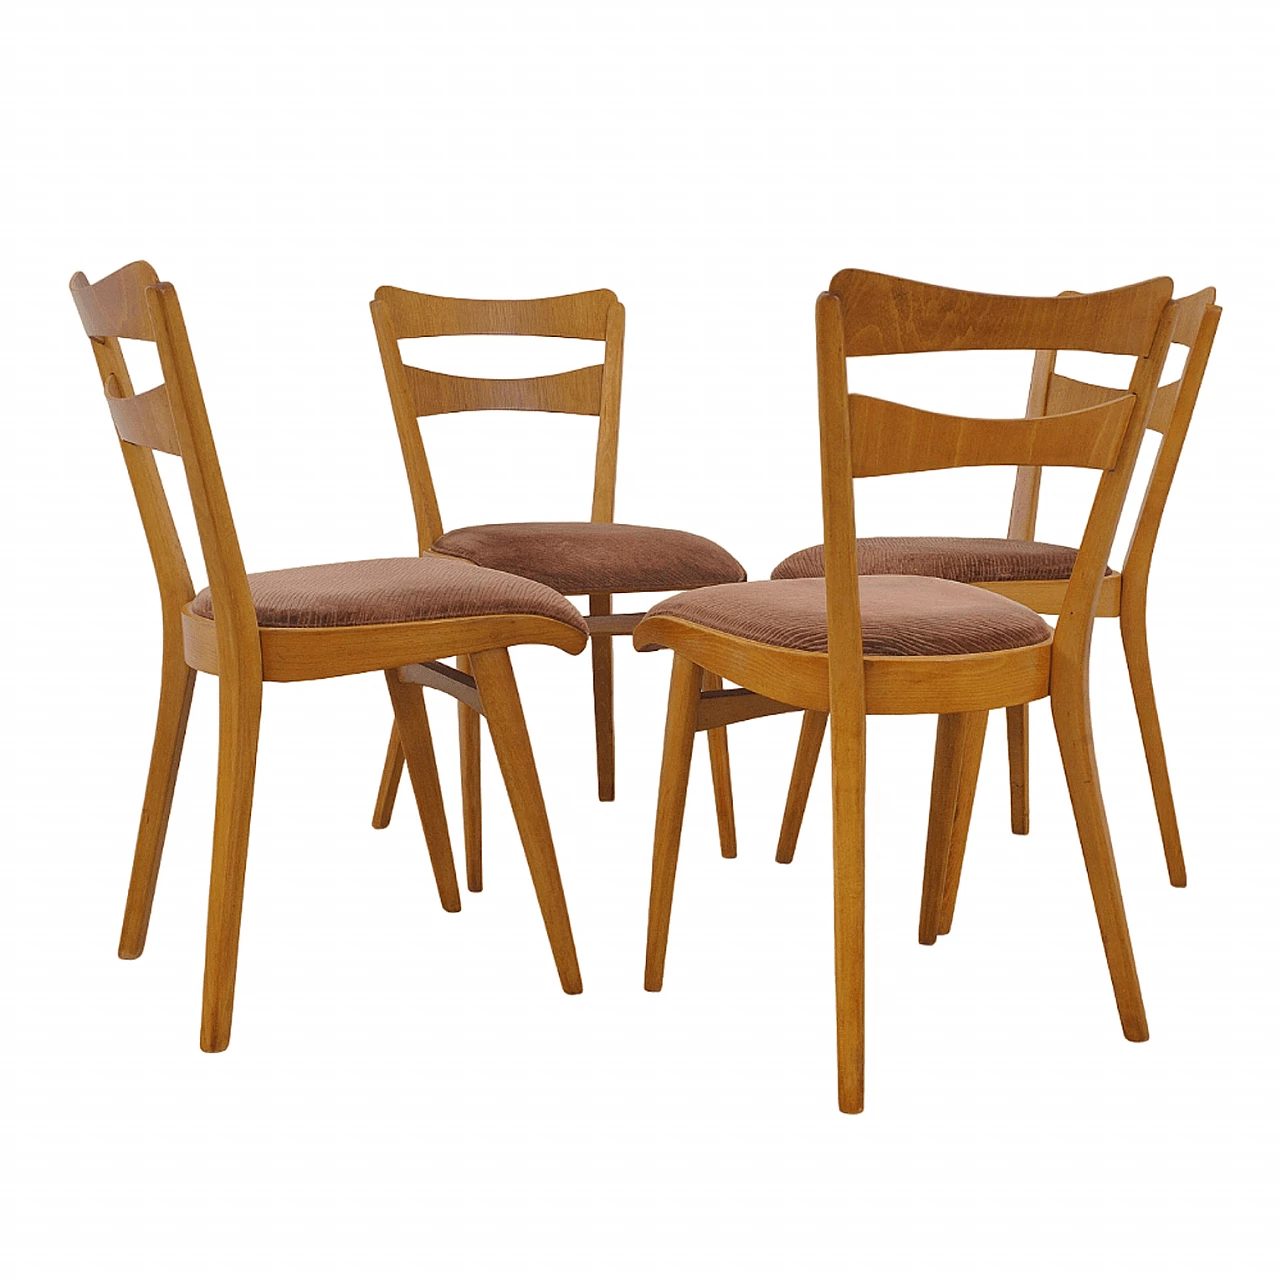 4 Chairs in beech and brown fabric by Tatra Nábytok, 1960s 1